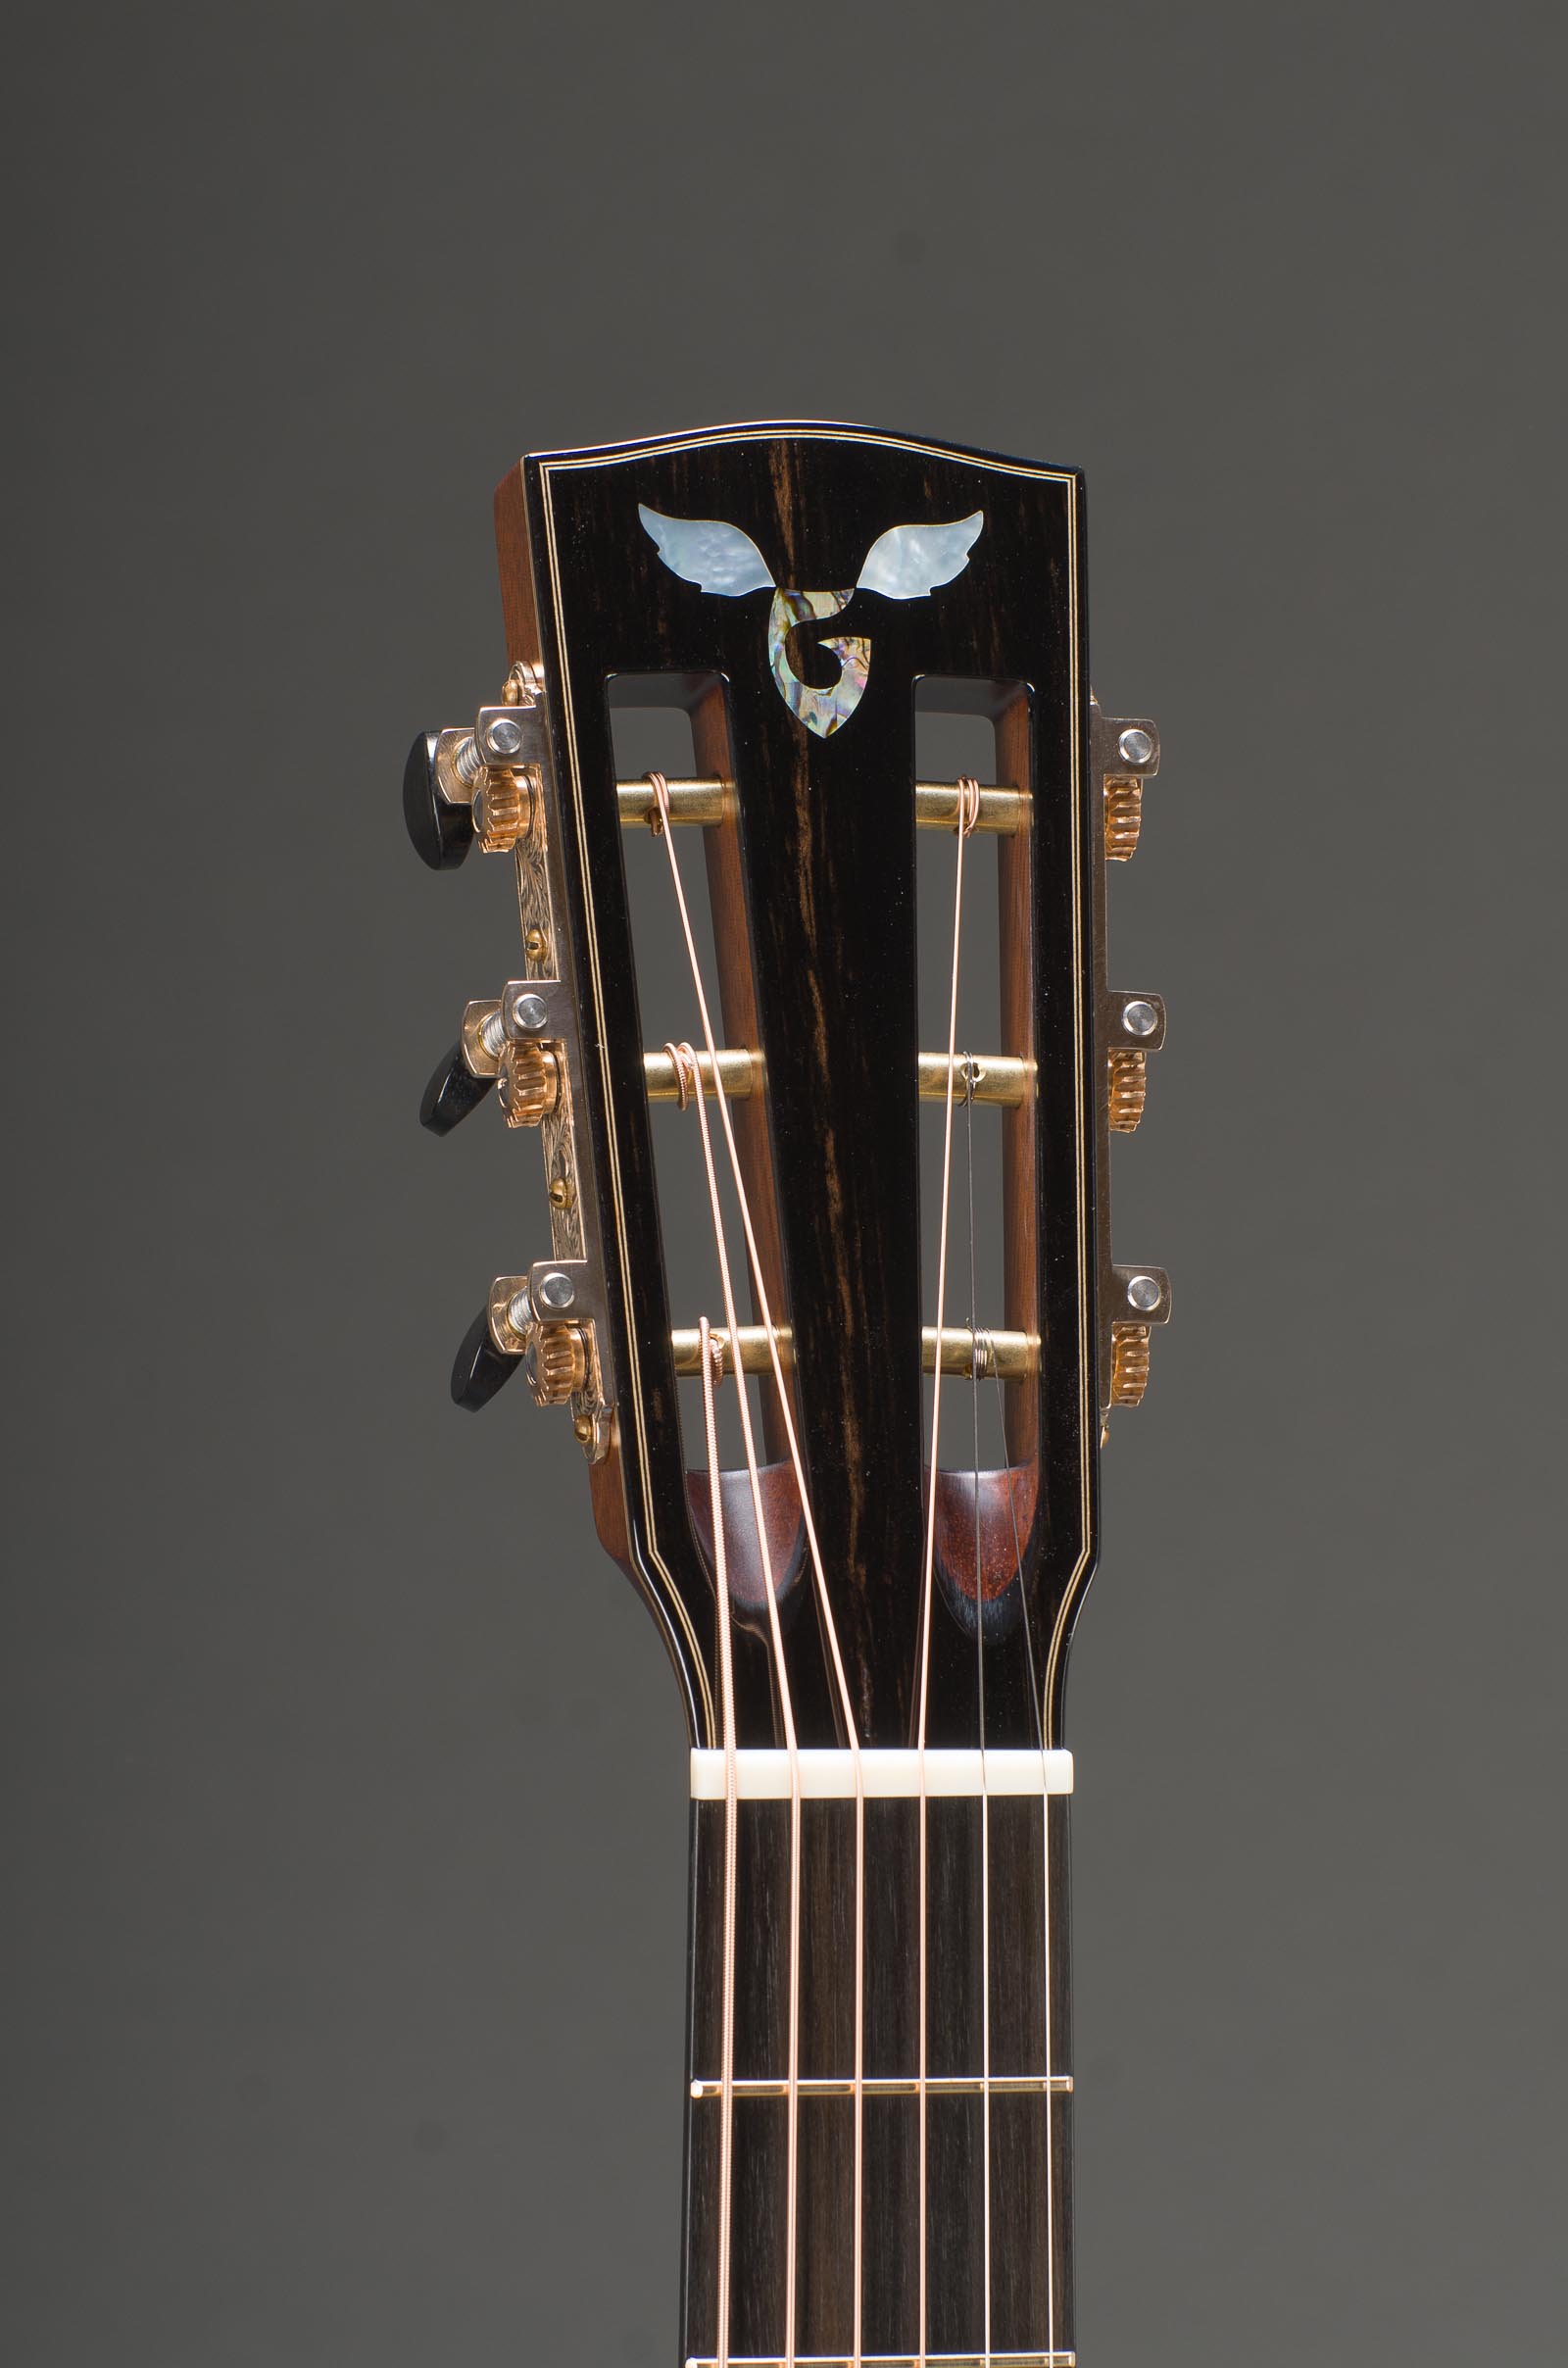 12-Fret Macassar Ebony Parlor Cutaway With Engelmann Spruce Top And Ebony Binding, Slotted Peghead Option, Waverly Bronze Patina Tuners With Ebony Buttons